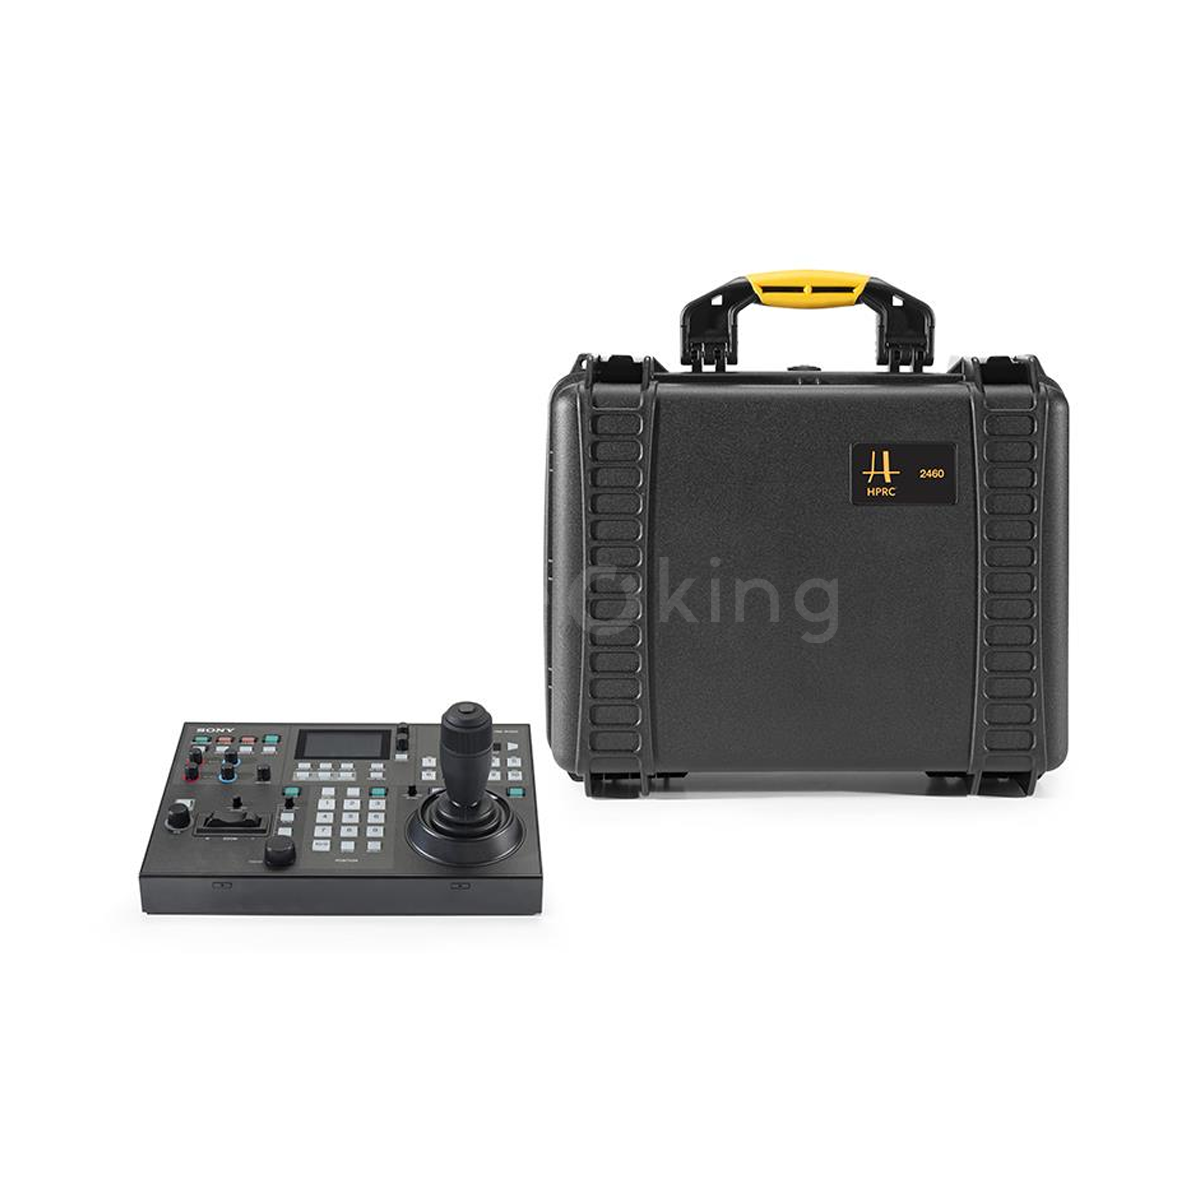 HPRC case for Sony IP500 PTZ Camera Remote Controller